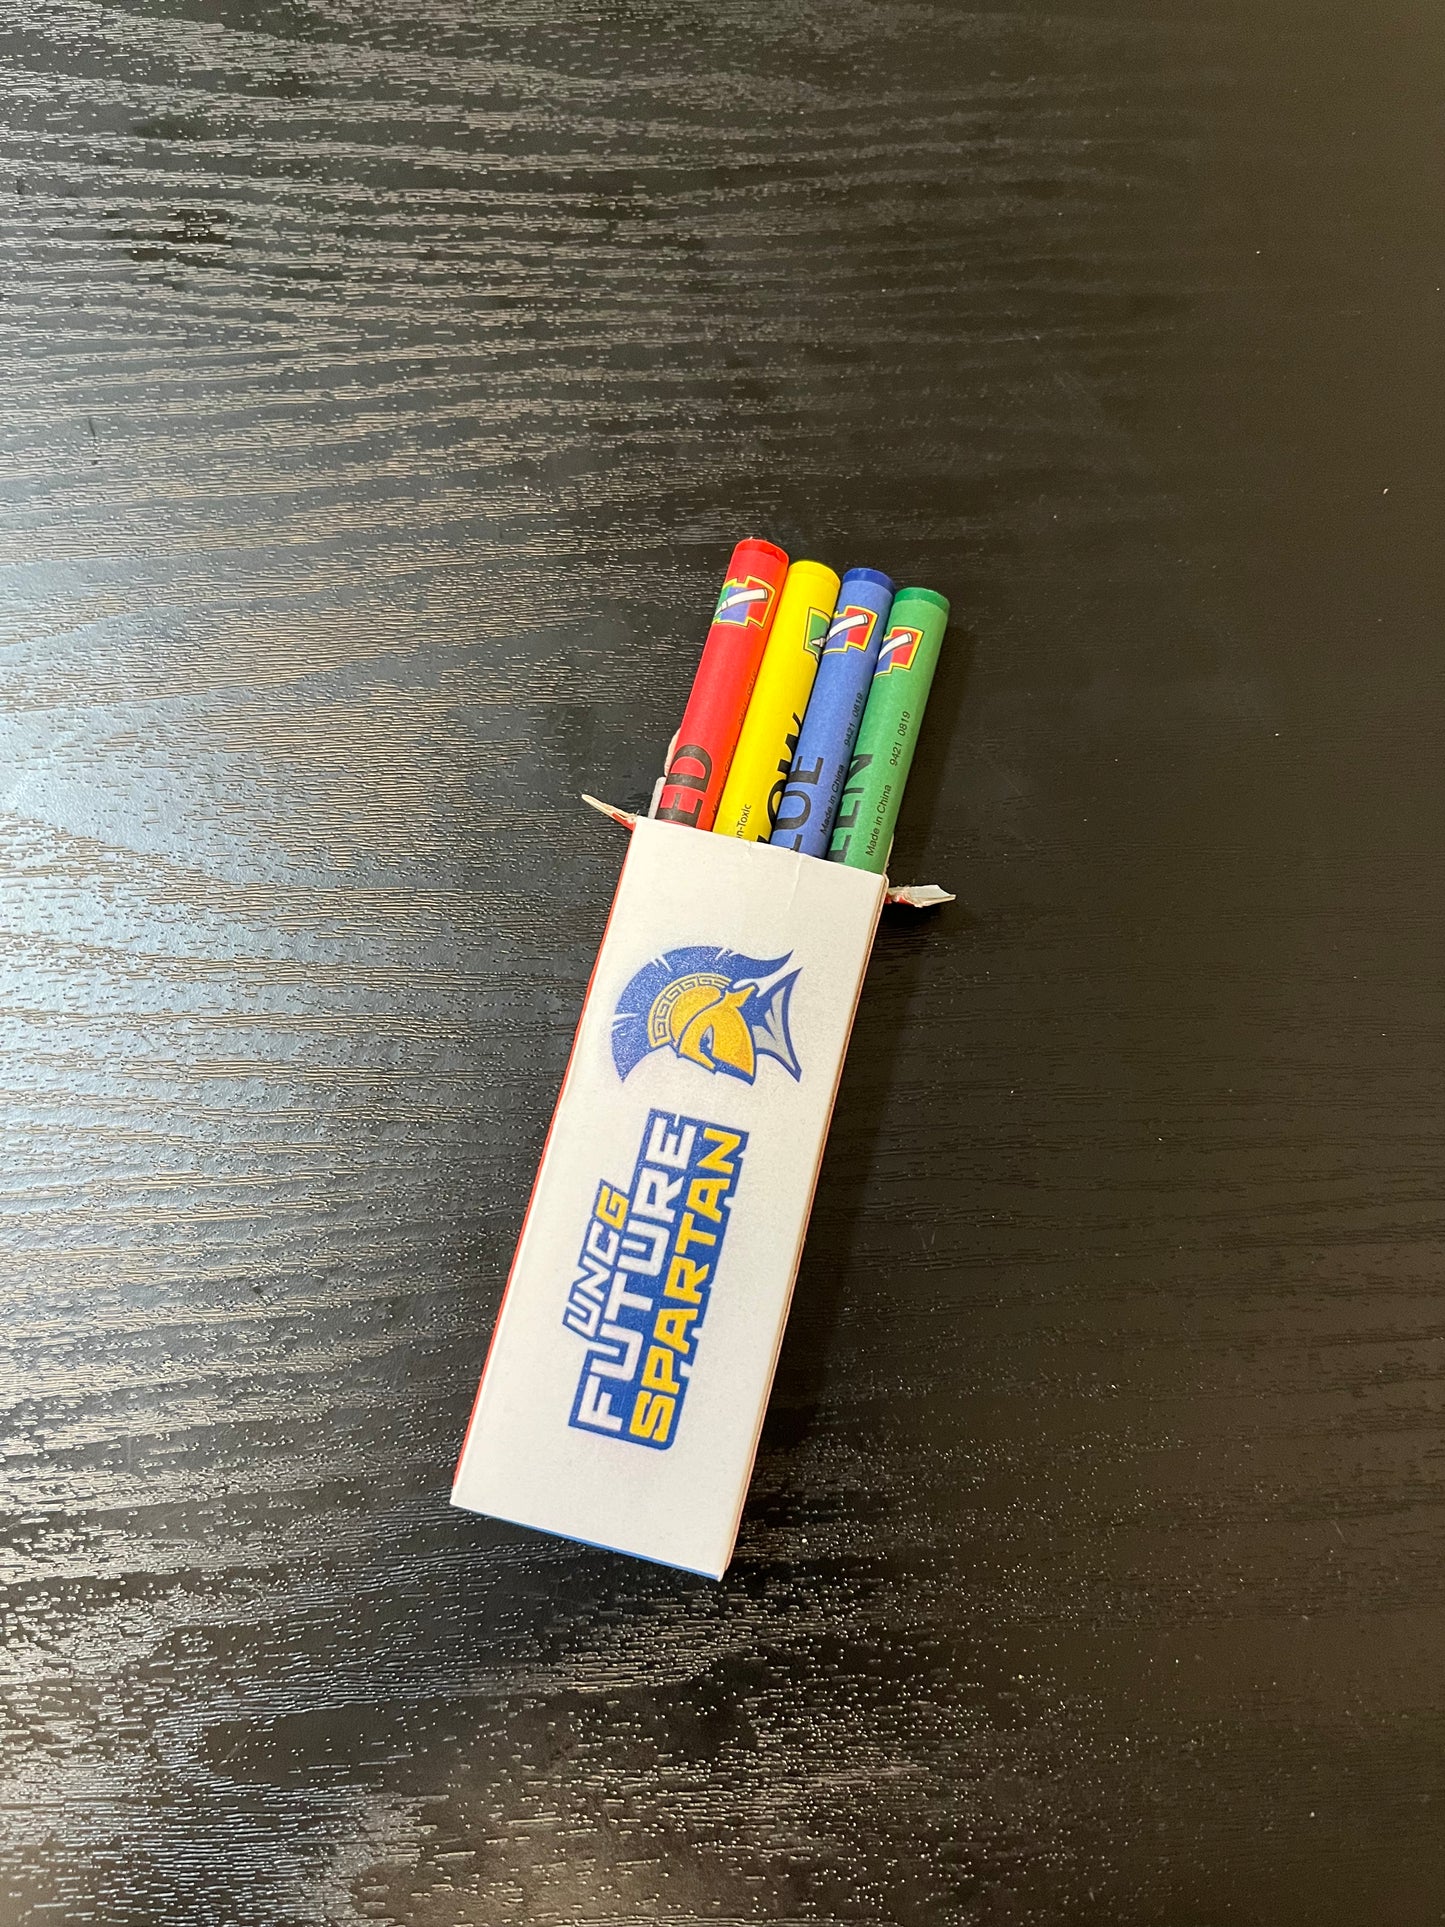 Crayons - 4 pack with Future Spartan logo